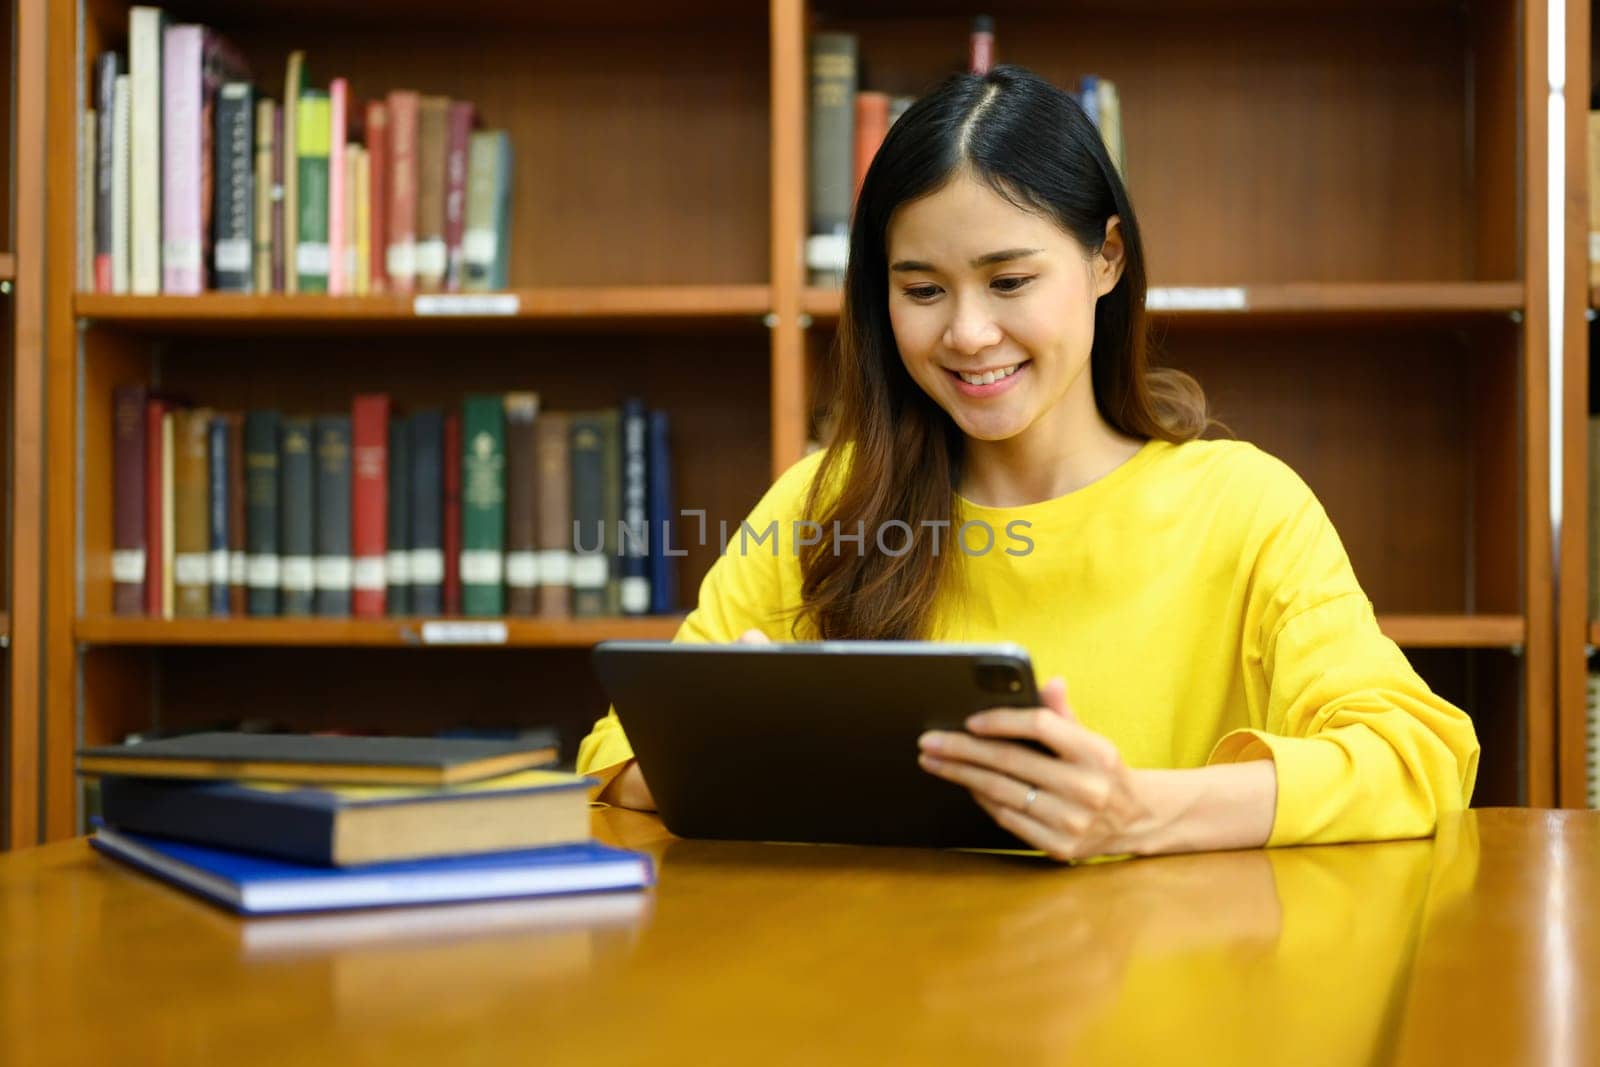 Smiling female college students preparing for exam, searching information on digital tablet in library.